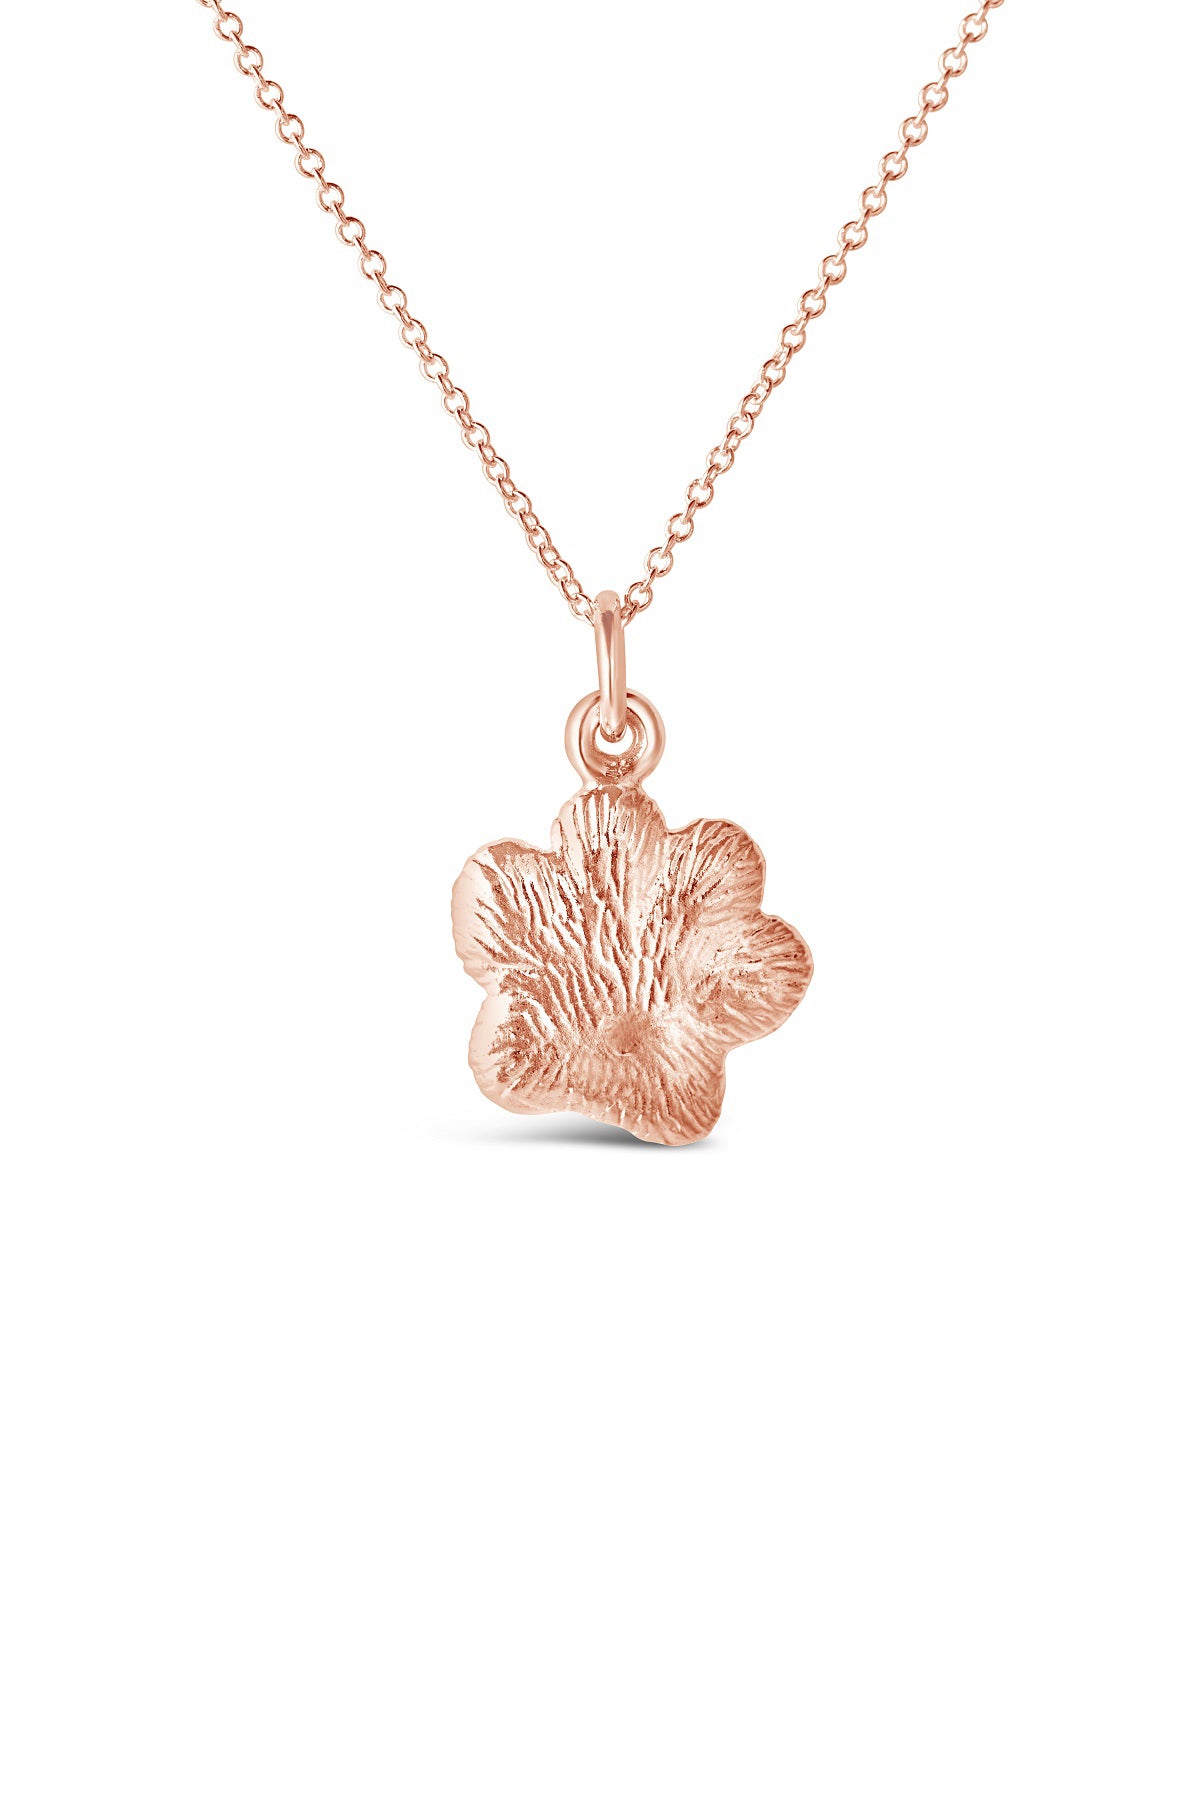 Icons ~ Paw Print Pendant in Gold